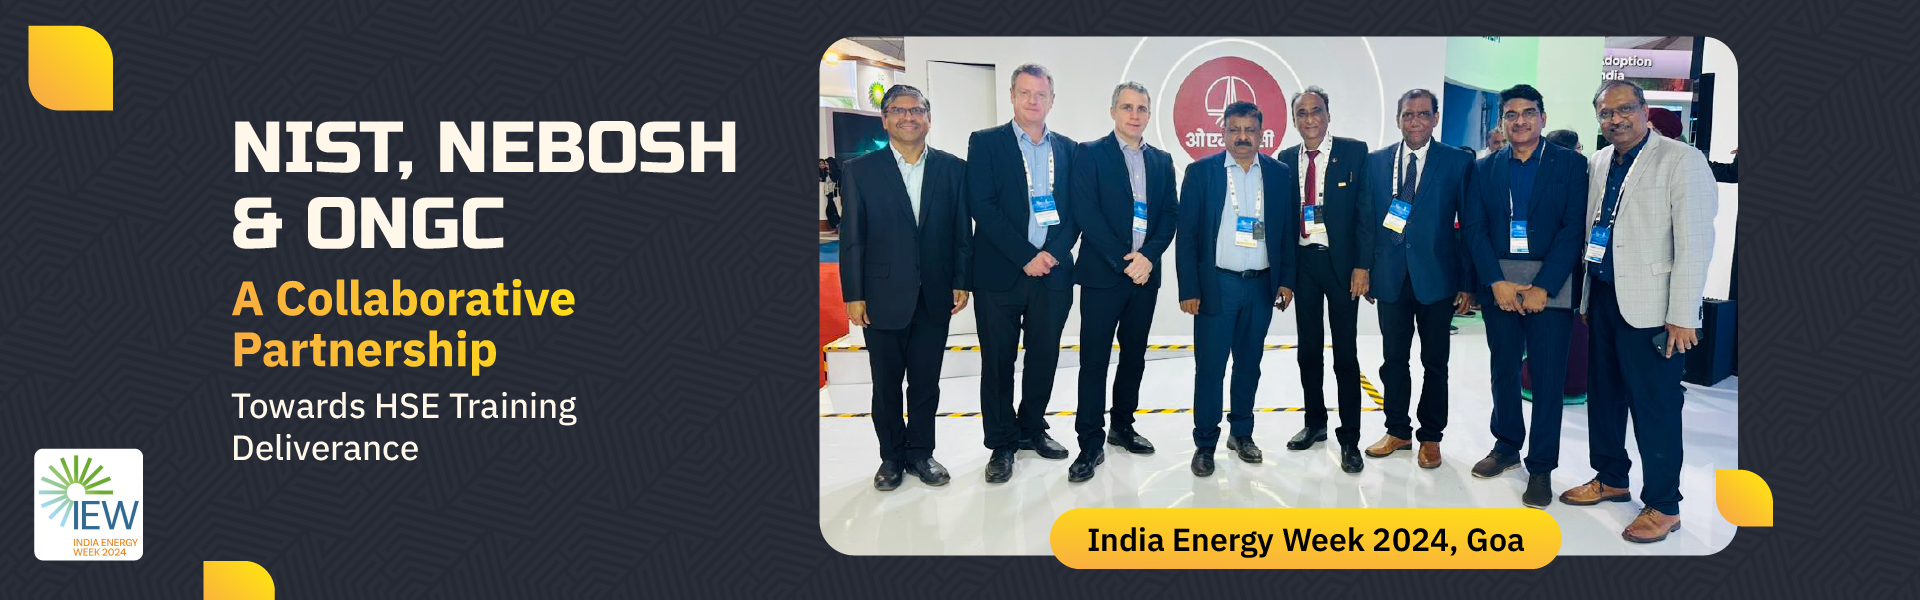 NIST, Nebosh, ONGC Collaboration at IEW'24